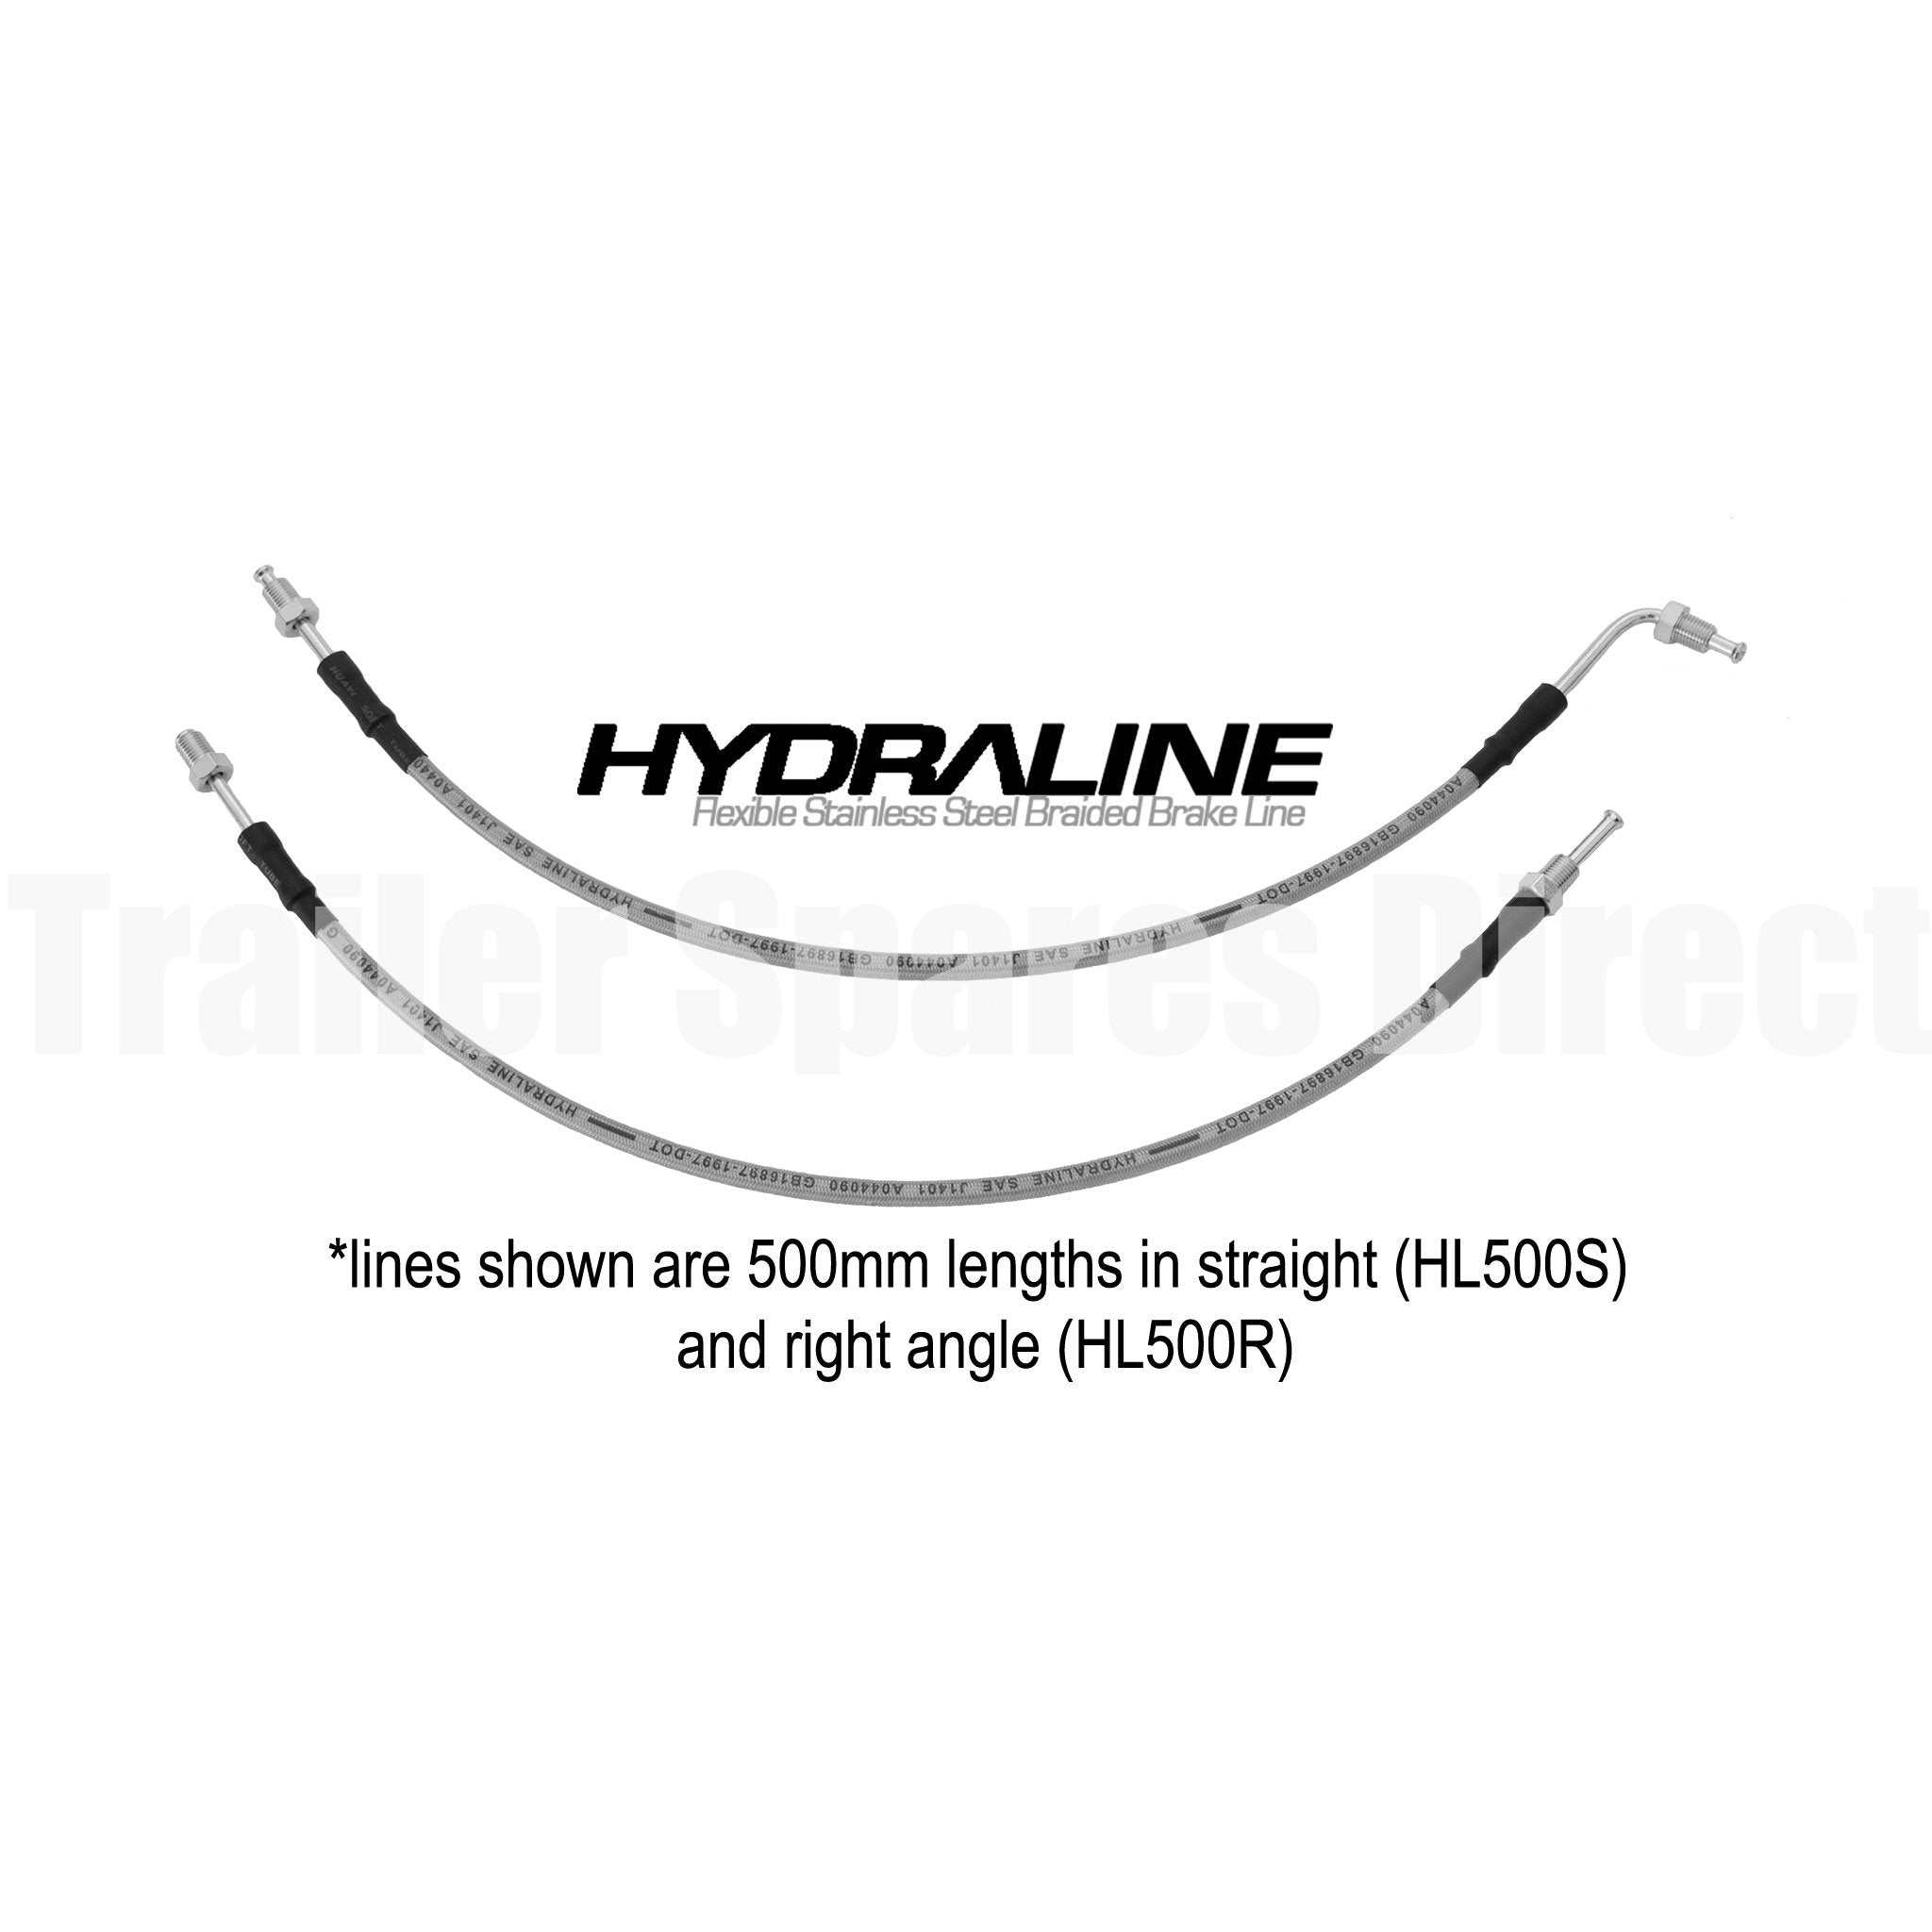 Tandem axle HydraLine kit with 2500mm lead line